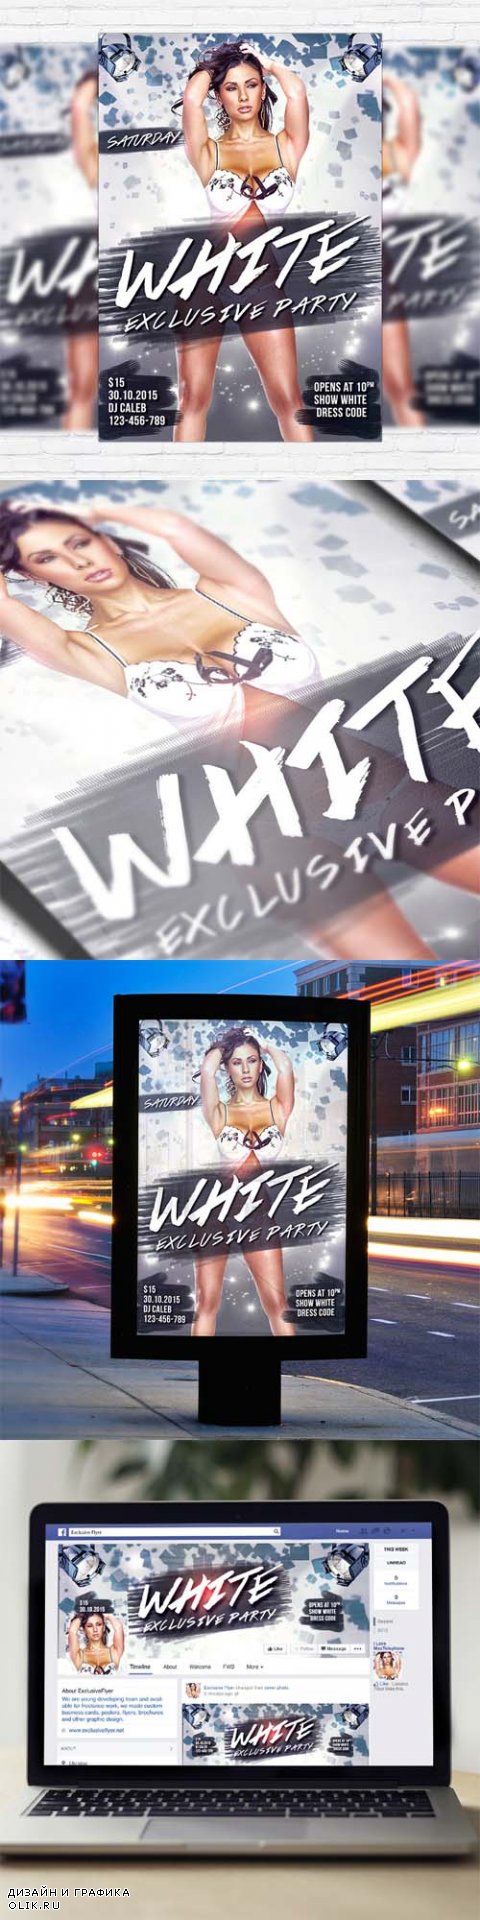 Flyer Template - White Exlusive Party + Facebook Cover